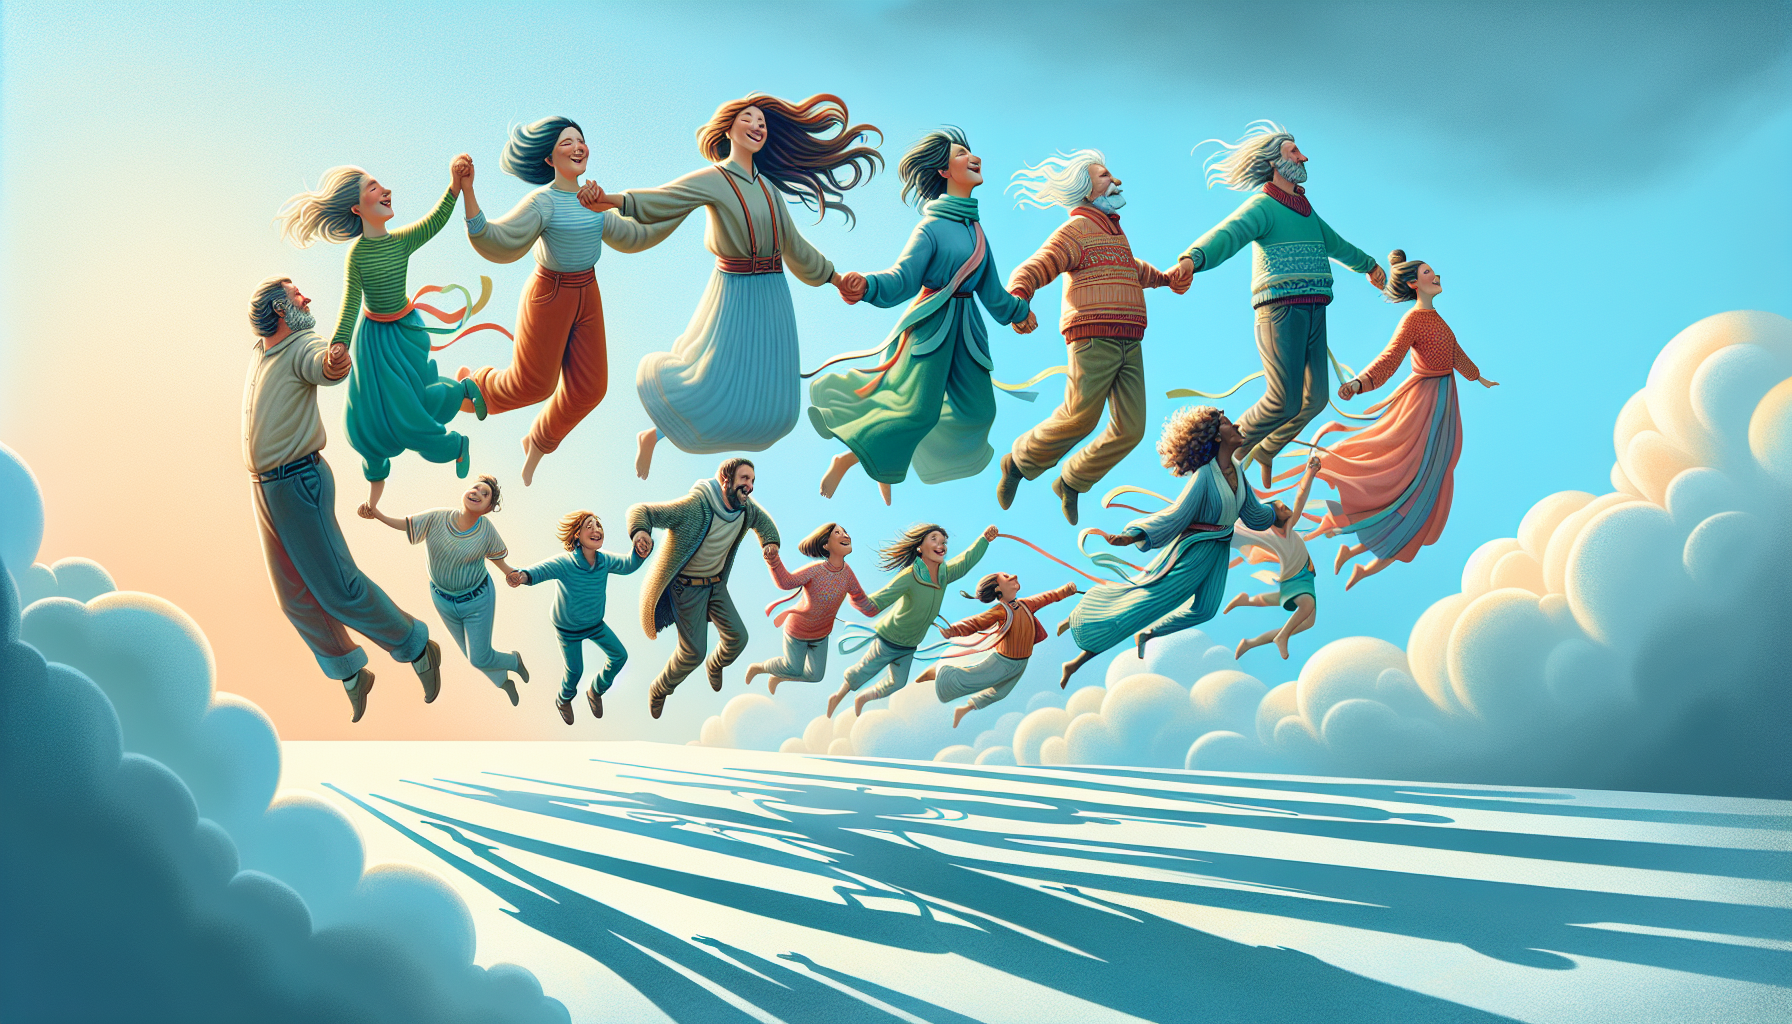 A whimsical illustration of a group of people holding hands and floating in the sky, representing the concept of high-flying expressions